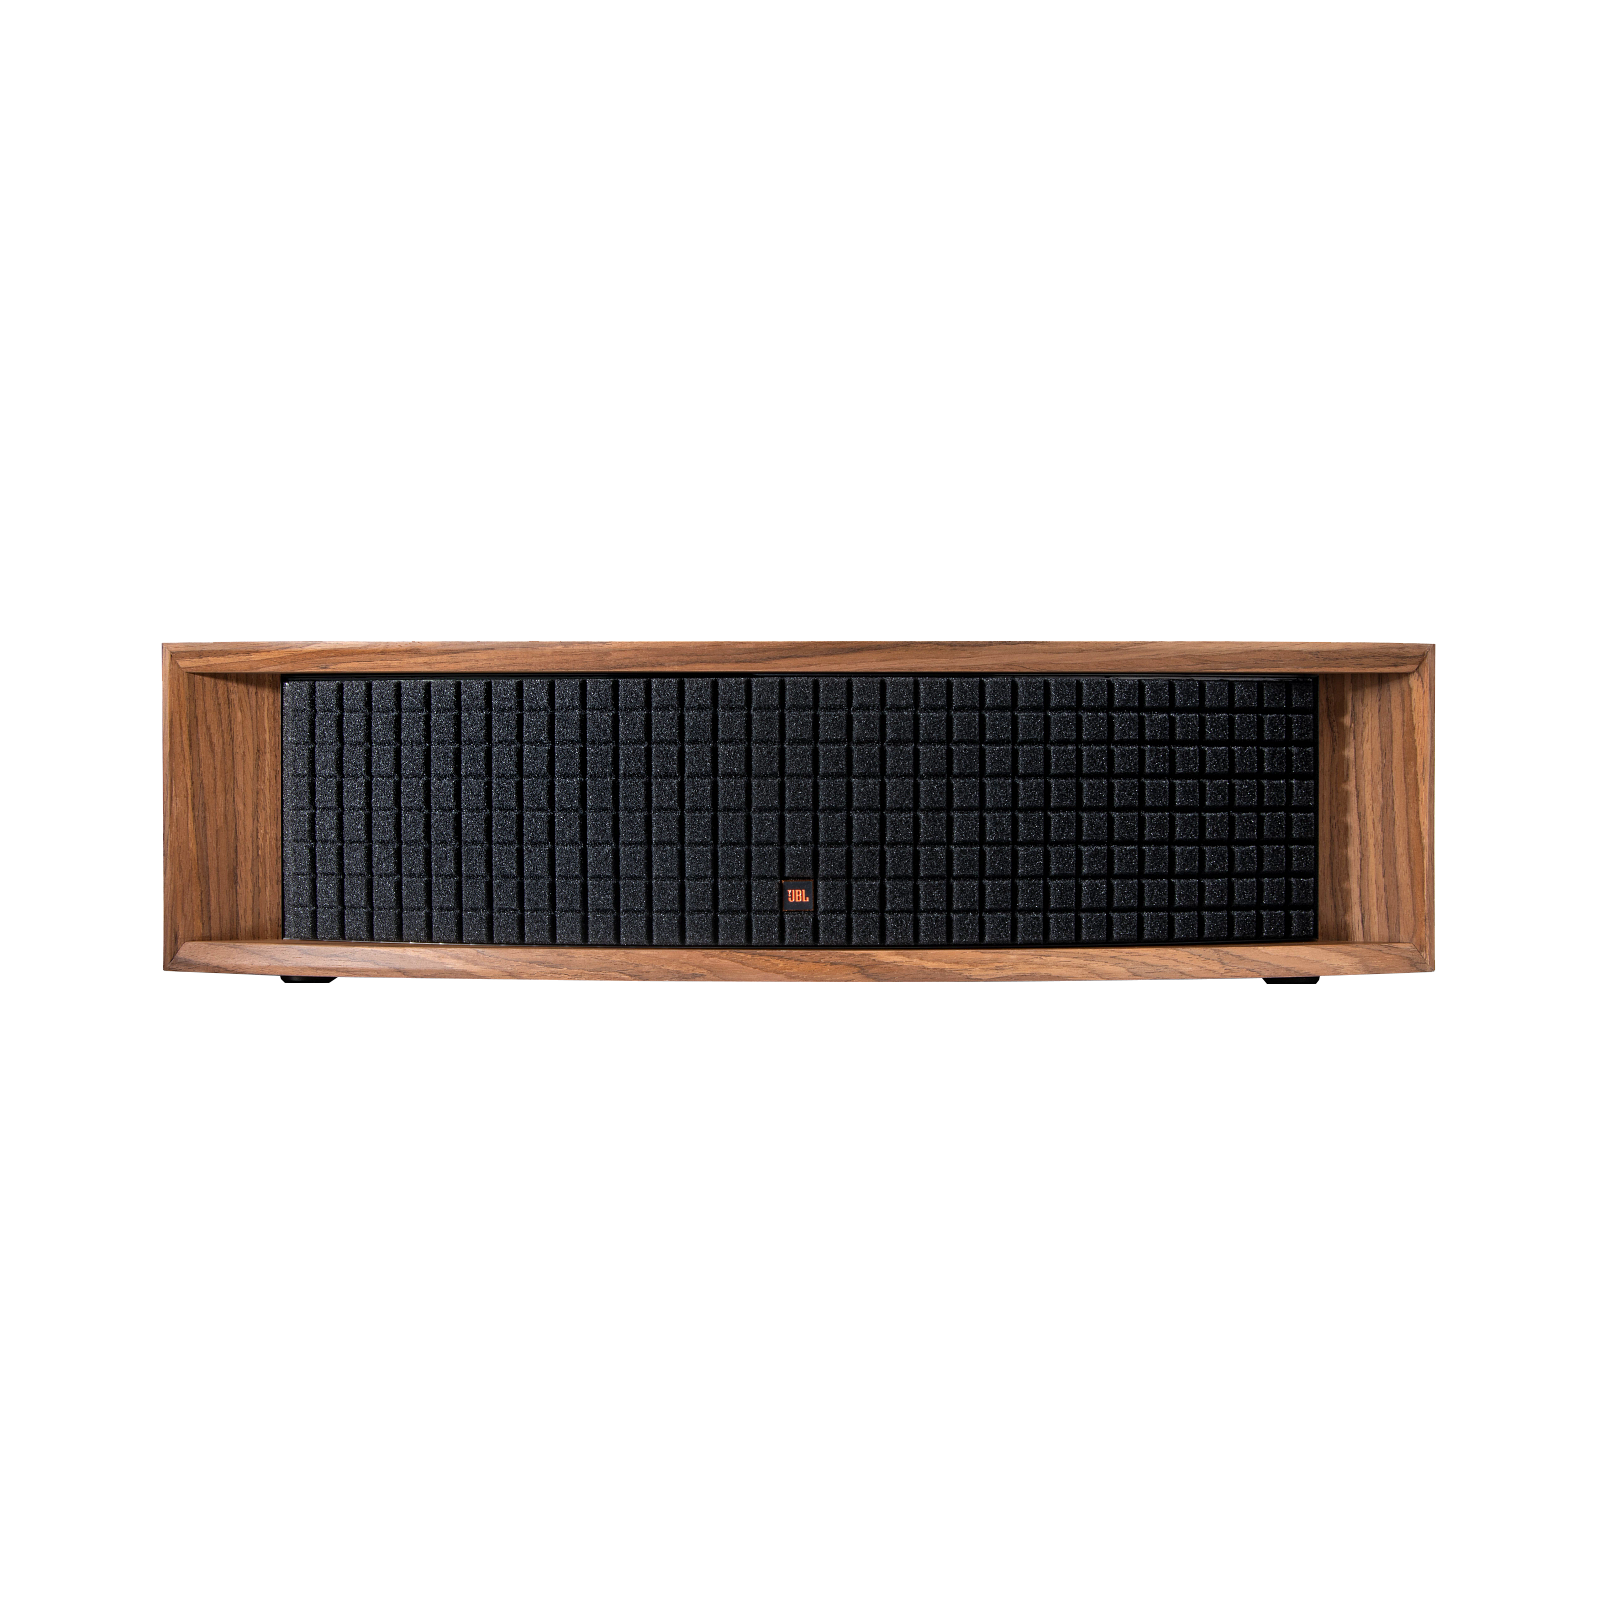 JBL Lms Music System   Integrated Music System